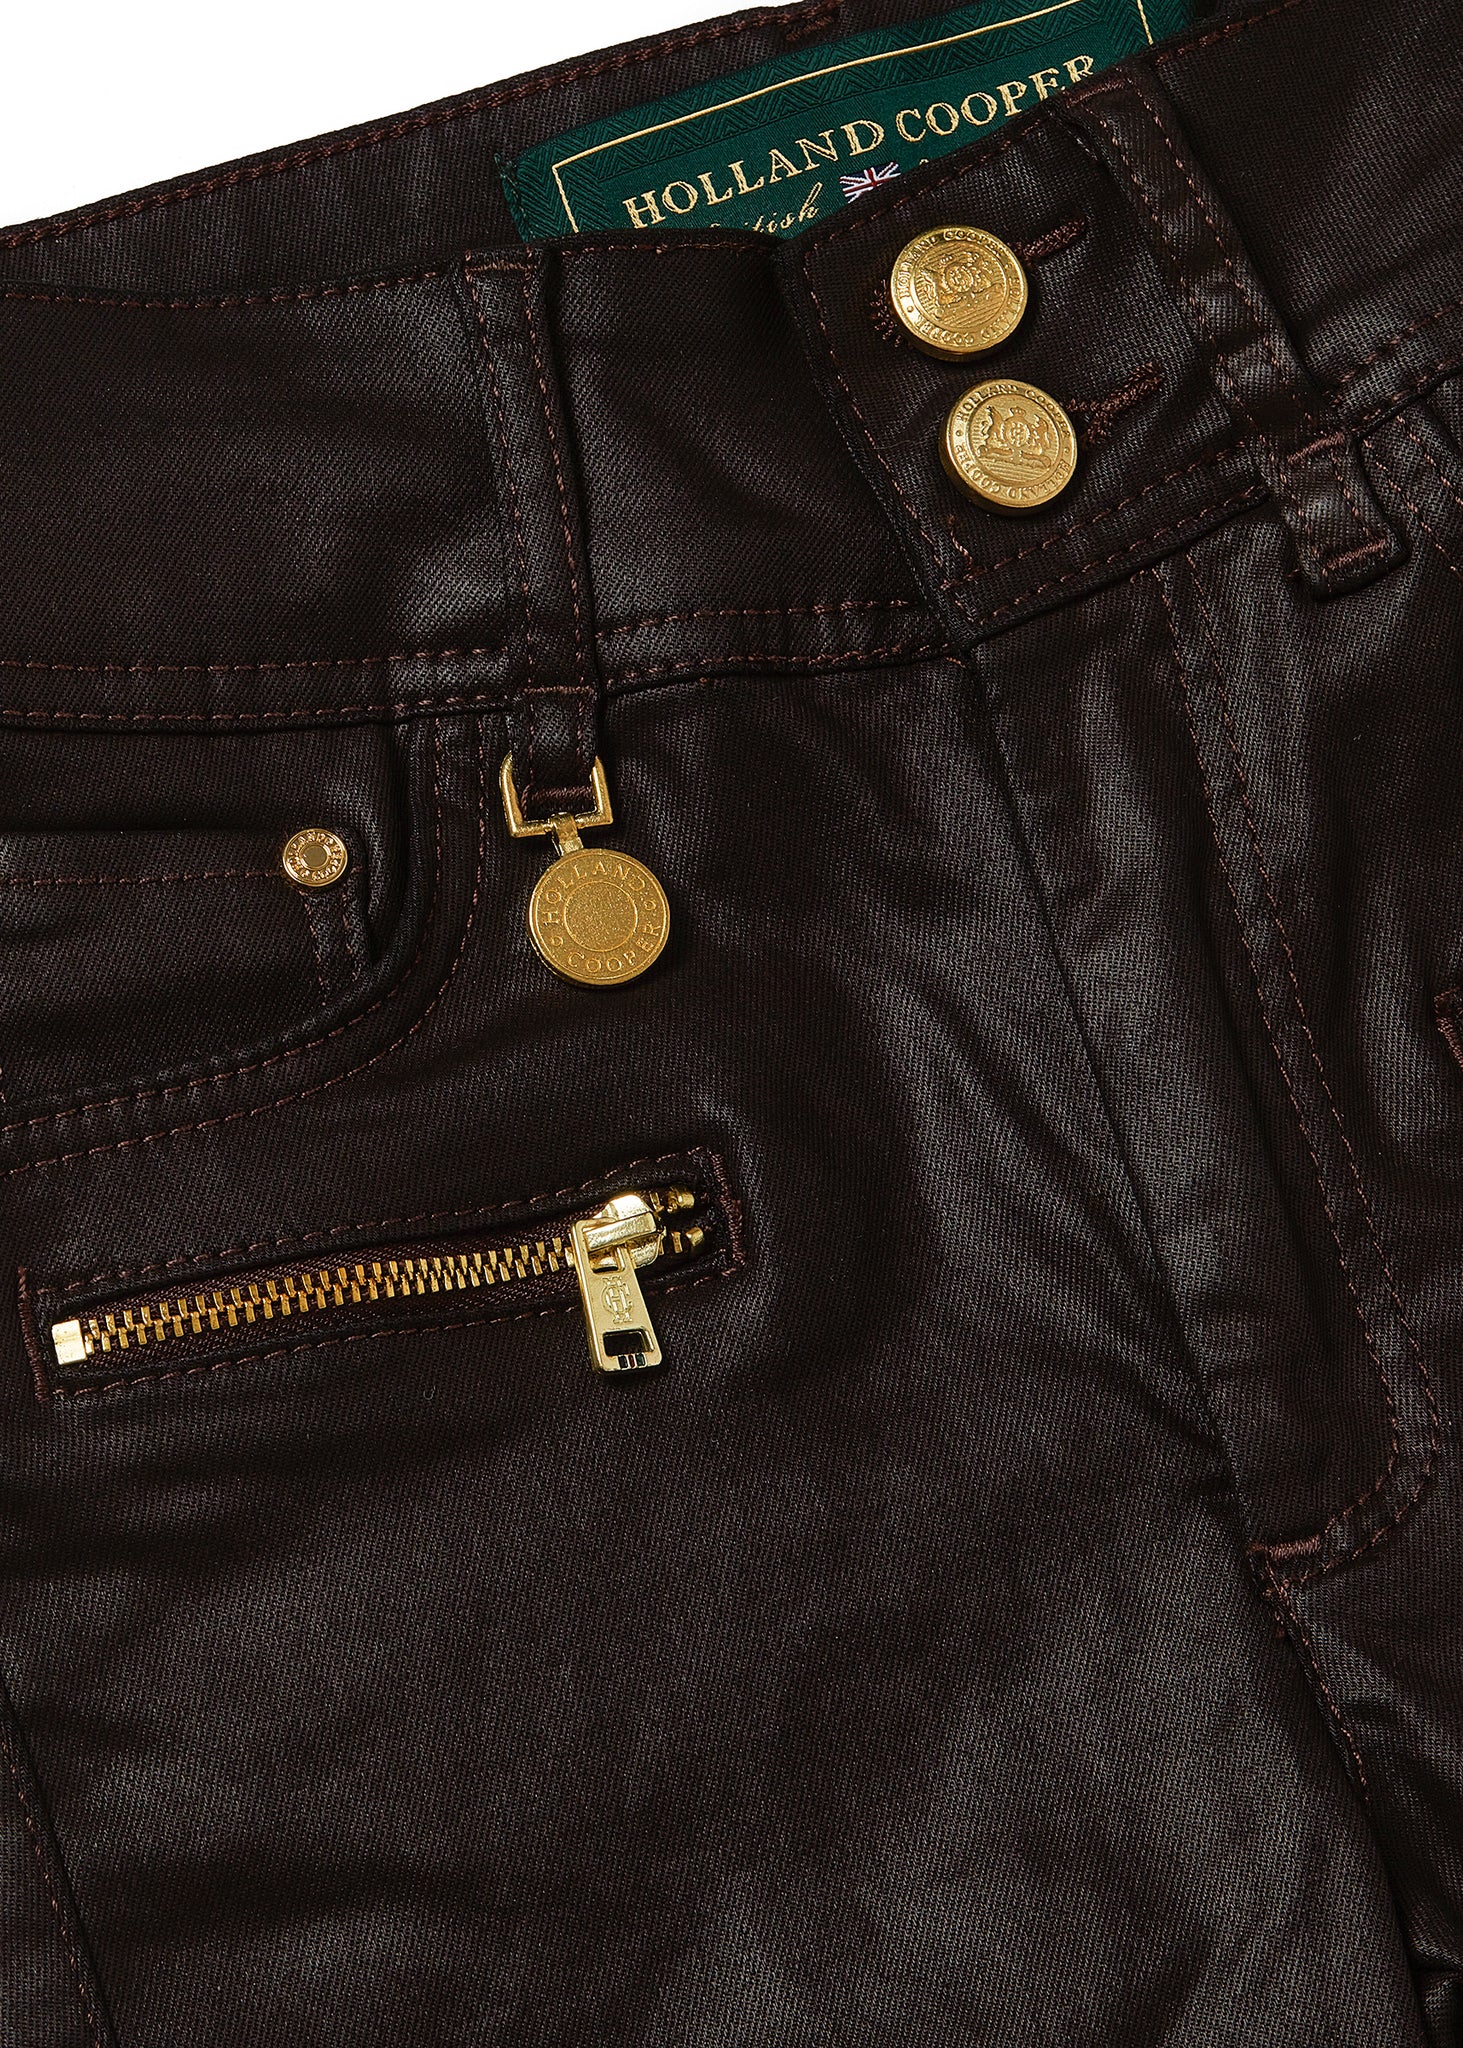 front pocket detail on womens high rise brown coated skinny jean for a waxed look with jodhpur style seams and two open zip pockets to the front with HC branded pulls